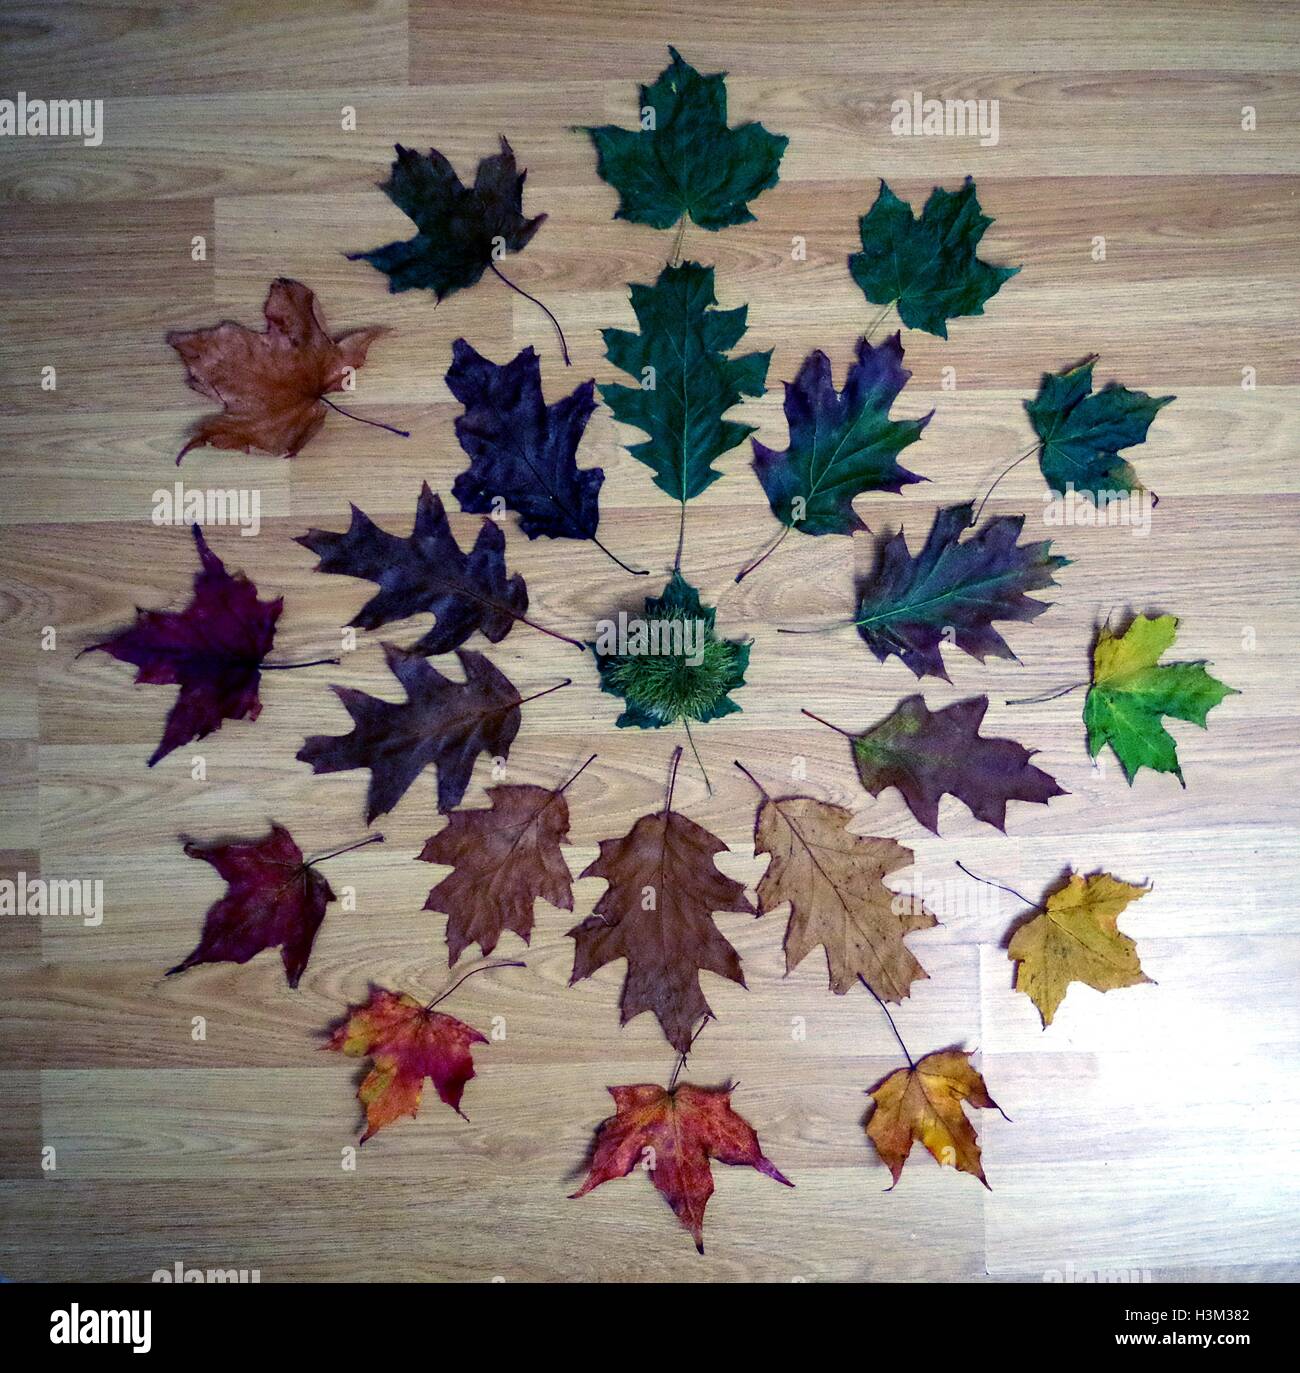 Autumn display of leafs to show the range of colors for the season Stock Photo